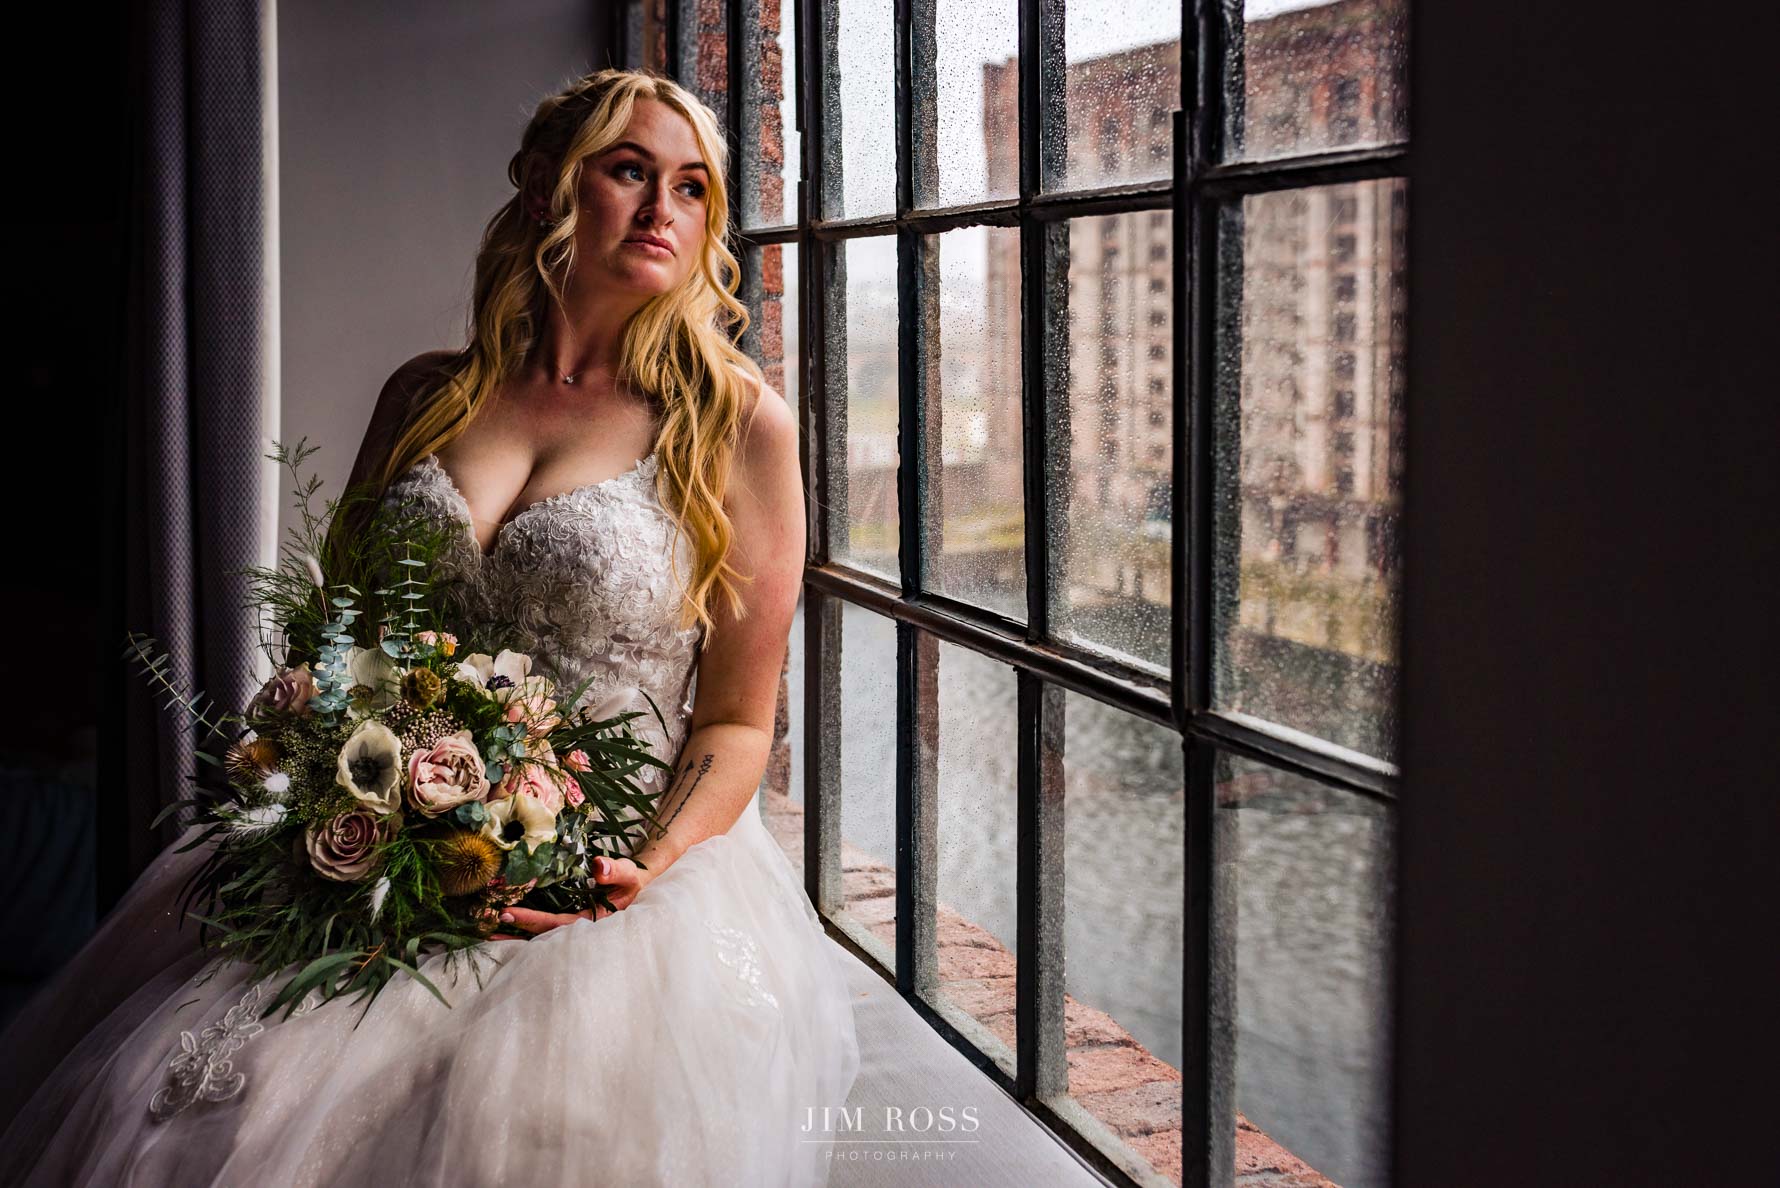 Bride ready with flowers sat in rainy window